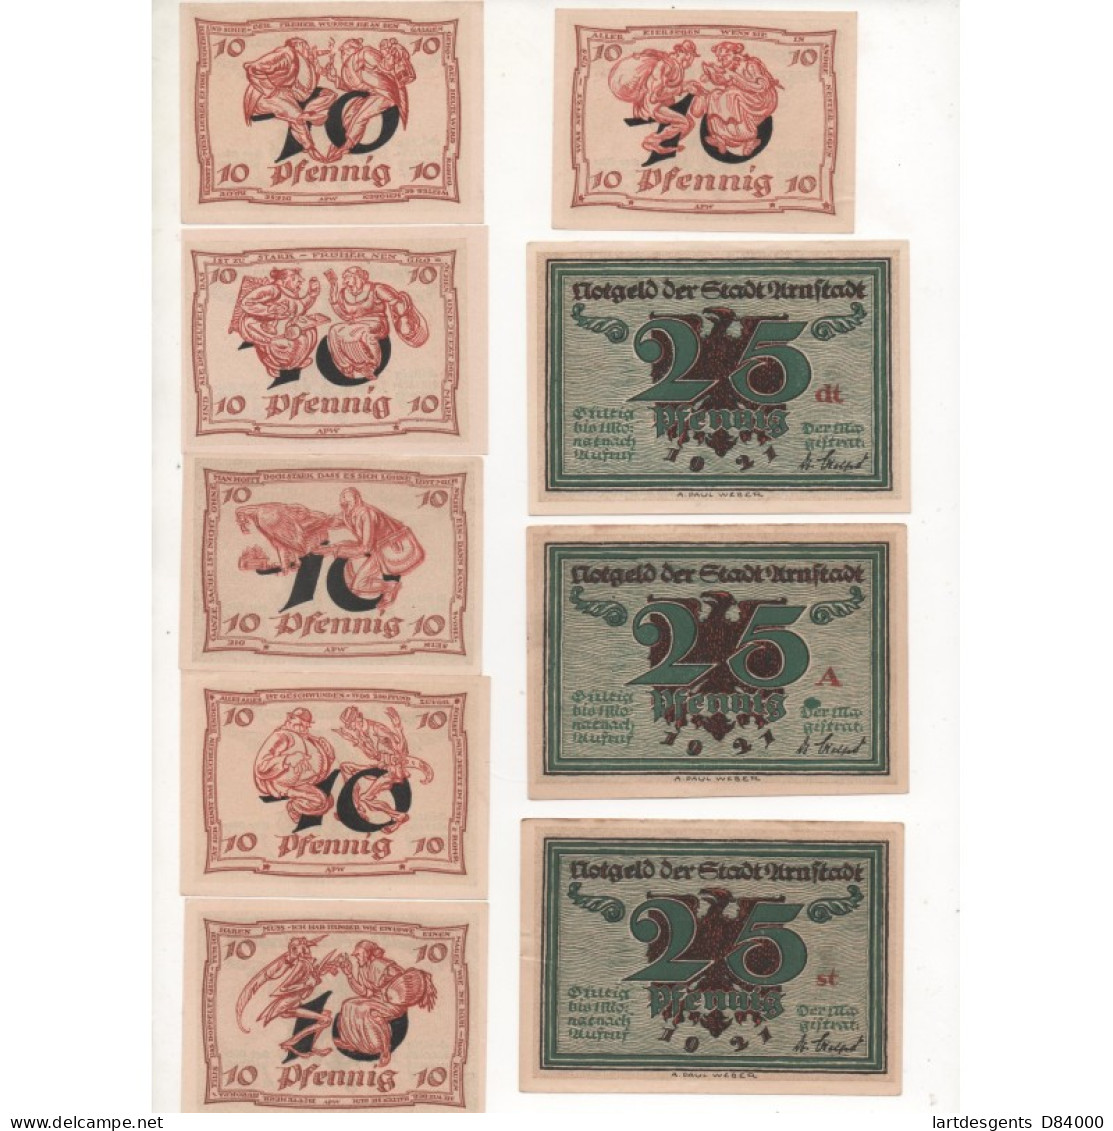 NOTGELD - ARNSTADT - 3 Series Of 6 (18 Different Notes) 10 & 25 & 50 Pfennig - 1921 (A061) - [11] Local Banknote Issues